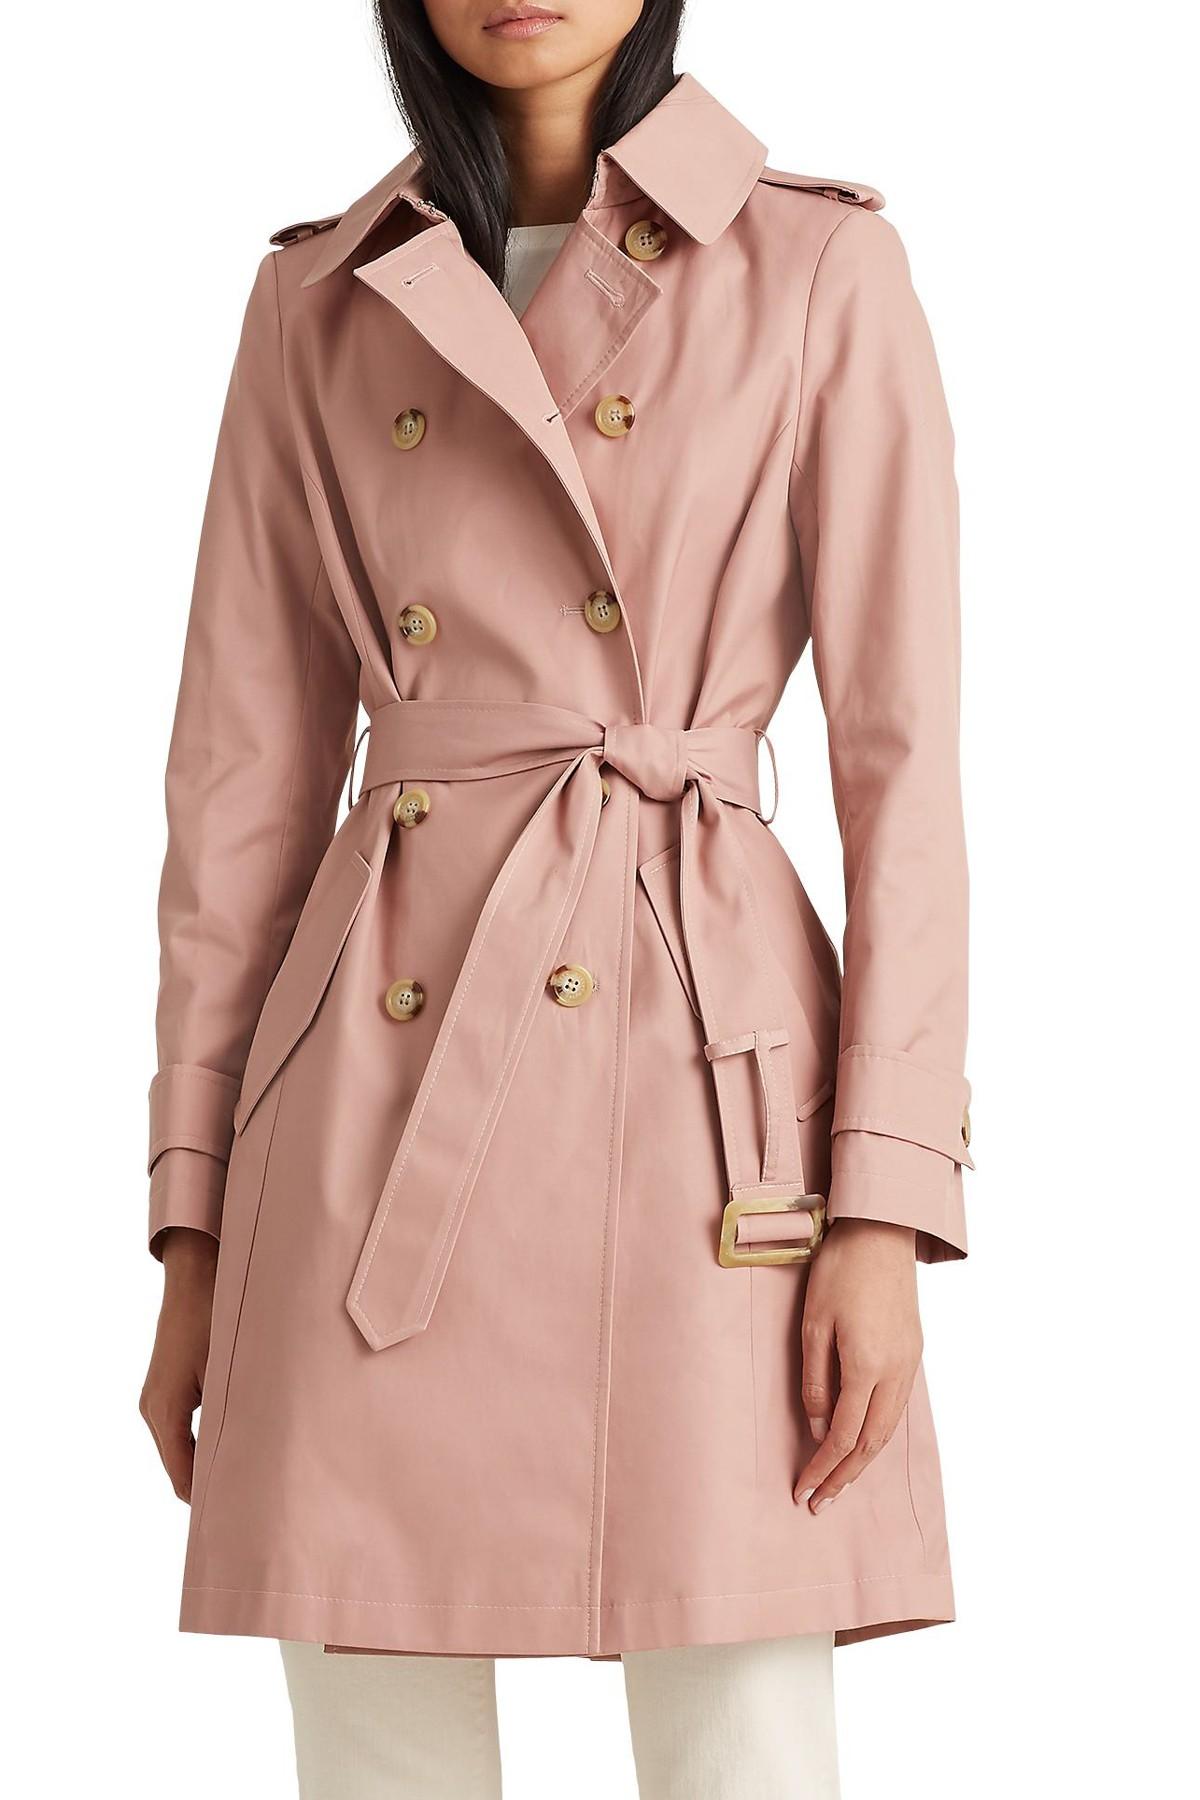 Lauren by Ralph Lauren Double Breasted Belted Trench Coat in Pink | Lyst